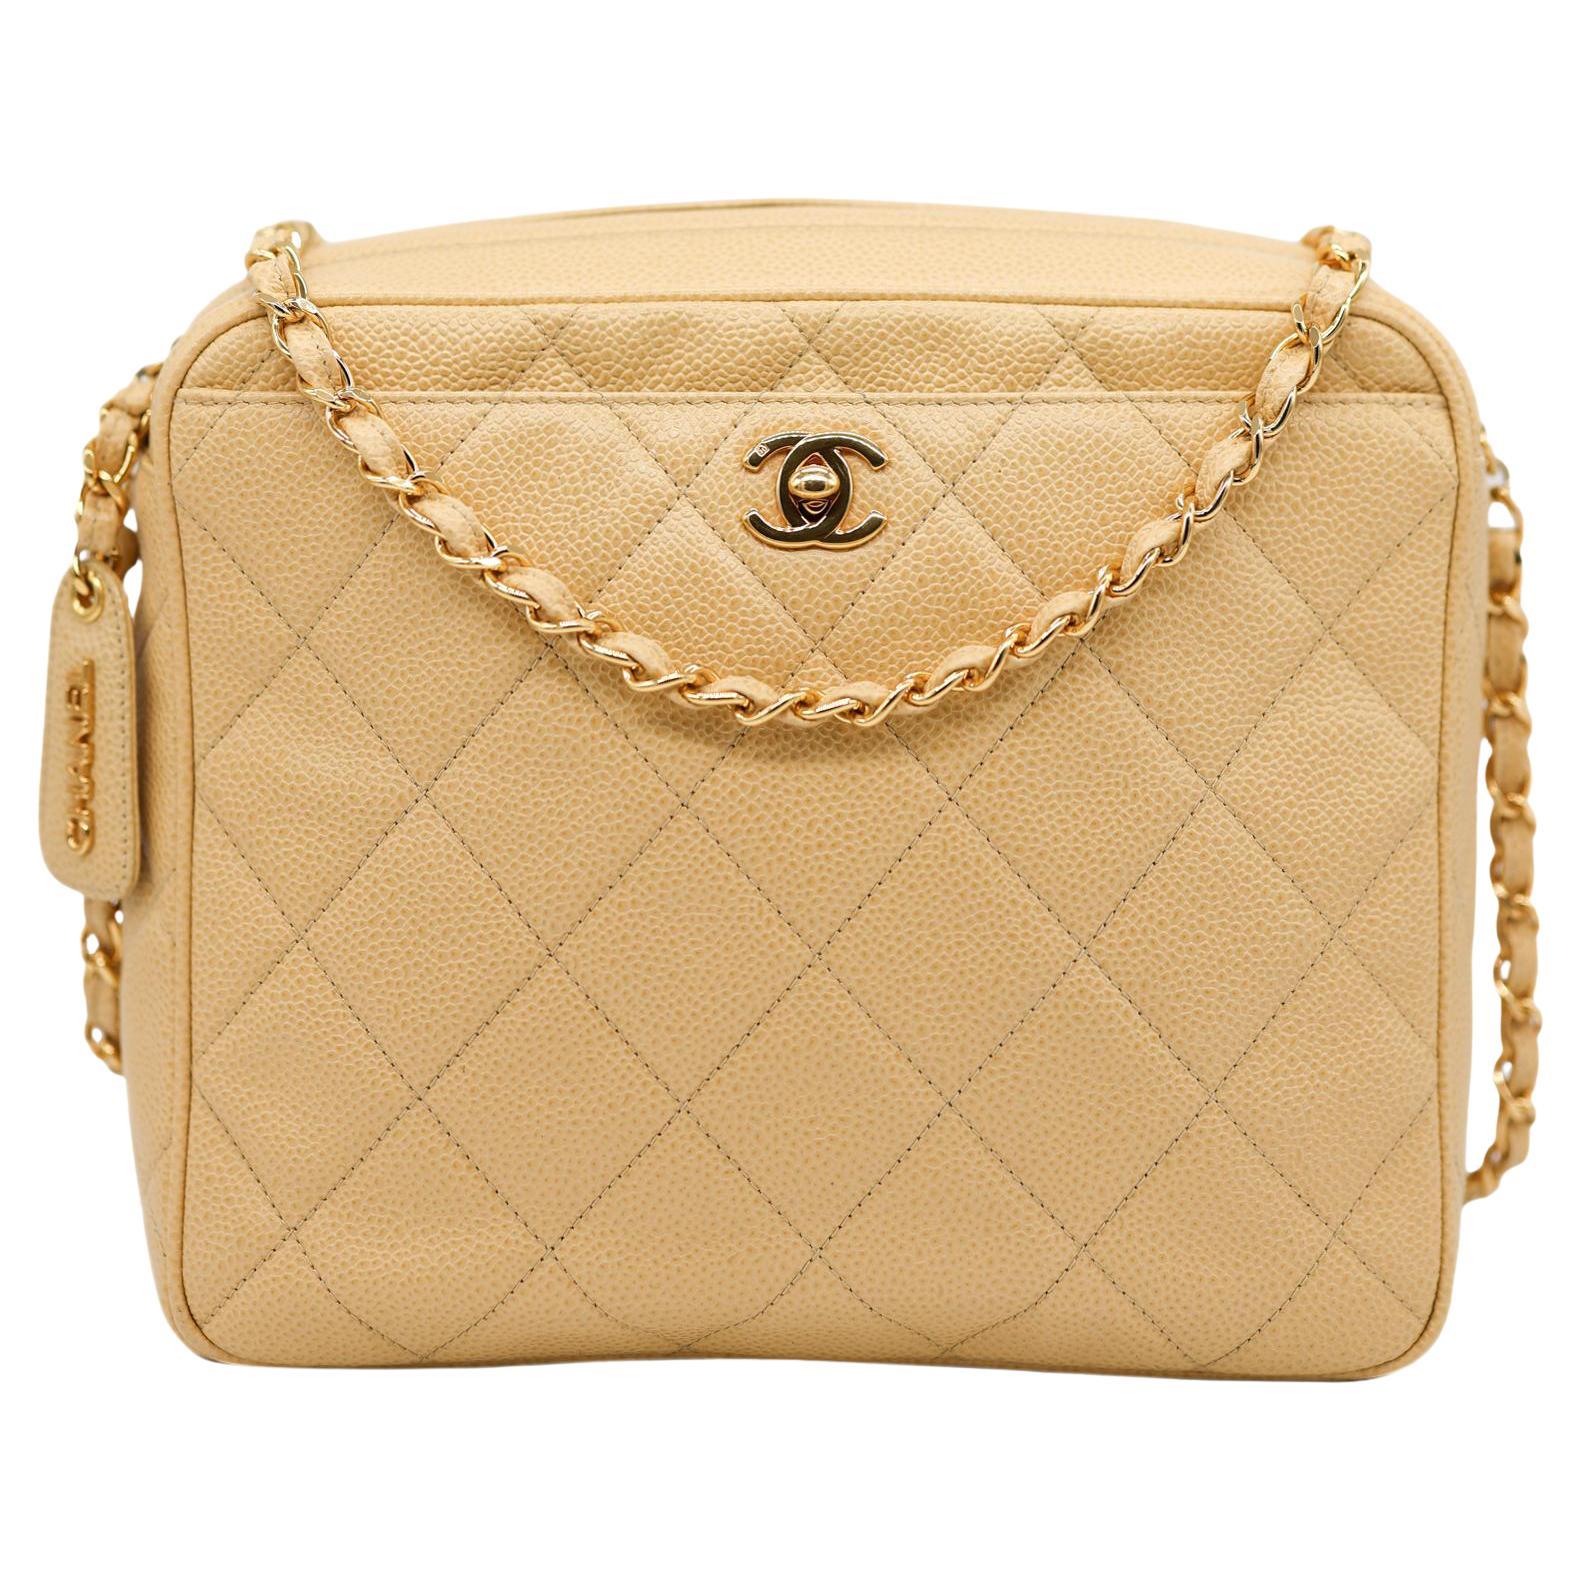 Chanel Vintage Quilted Caviar Leather Camera Bag with Gold Hardware, 1996 -  1997. at 1stDibs